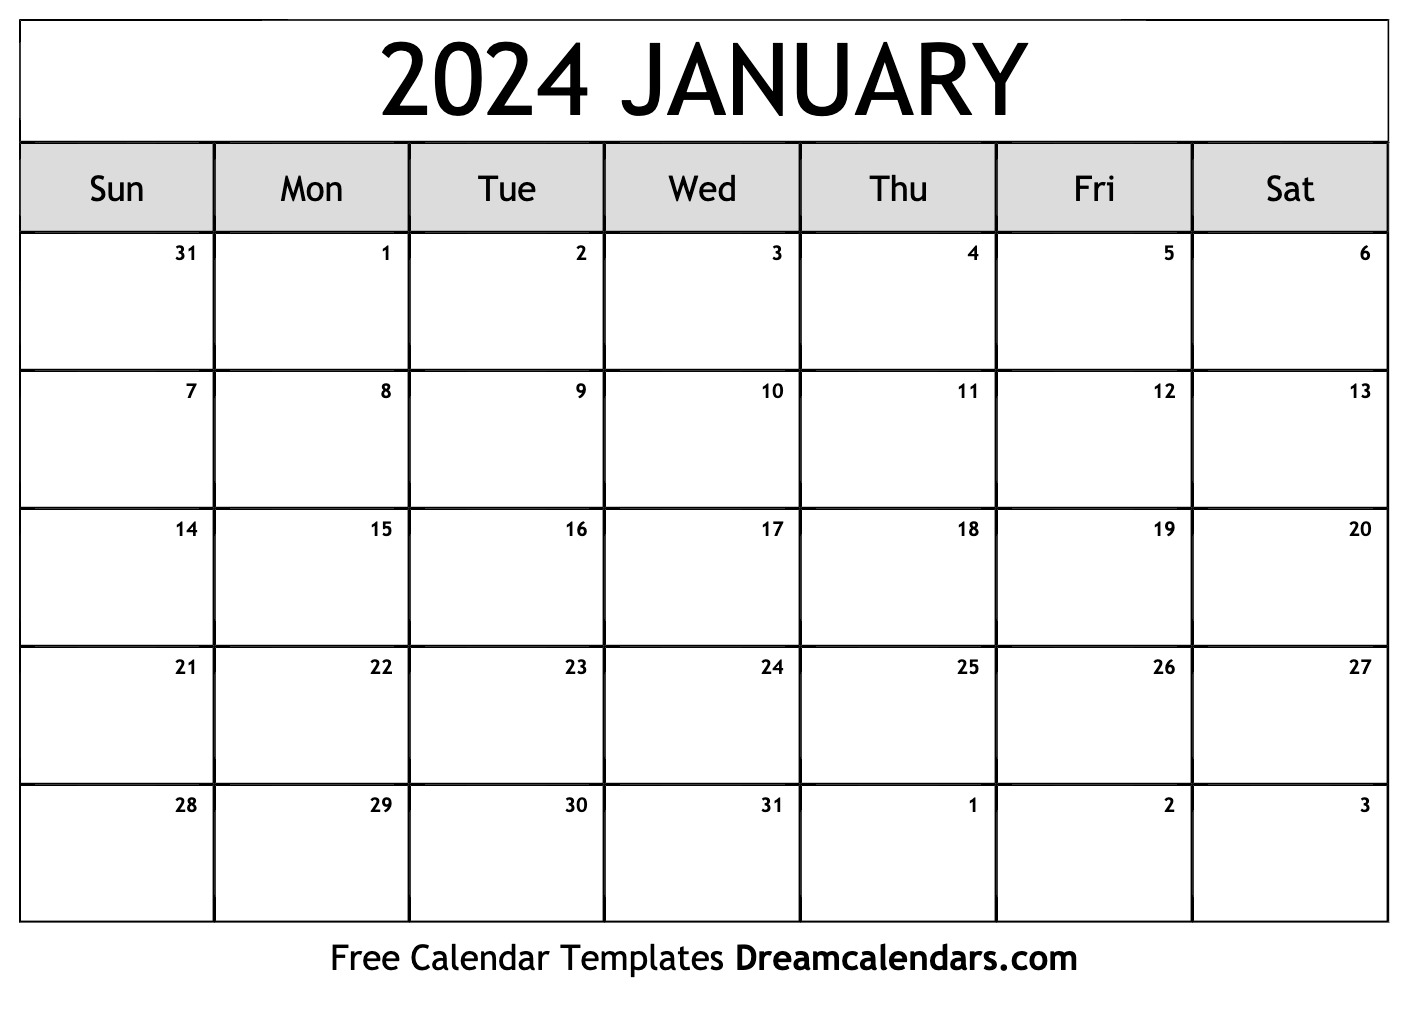 January 2024 Calendar - Free Printable with Holidays and Observances